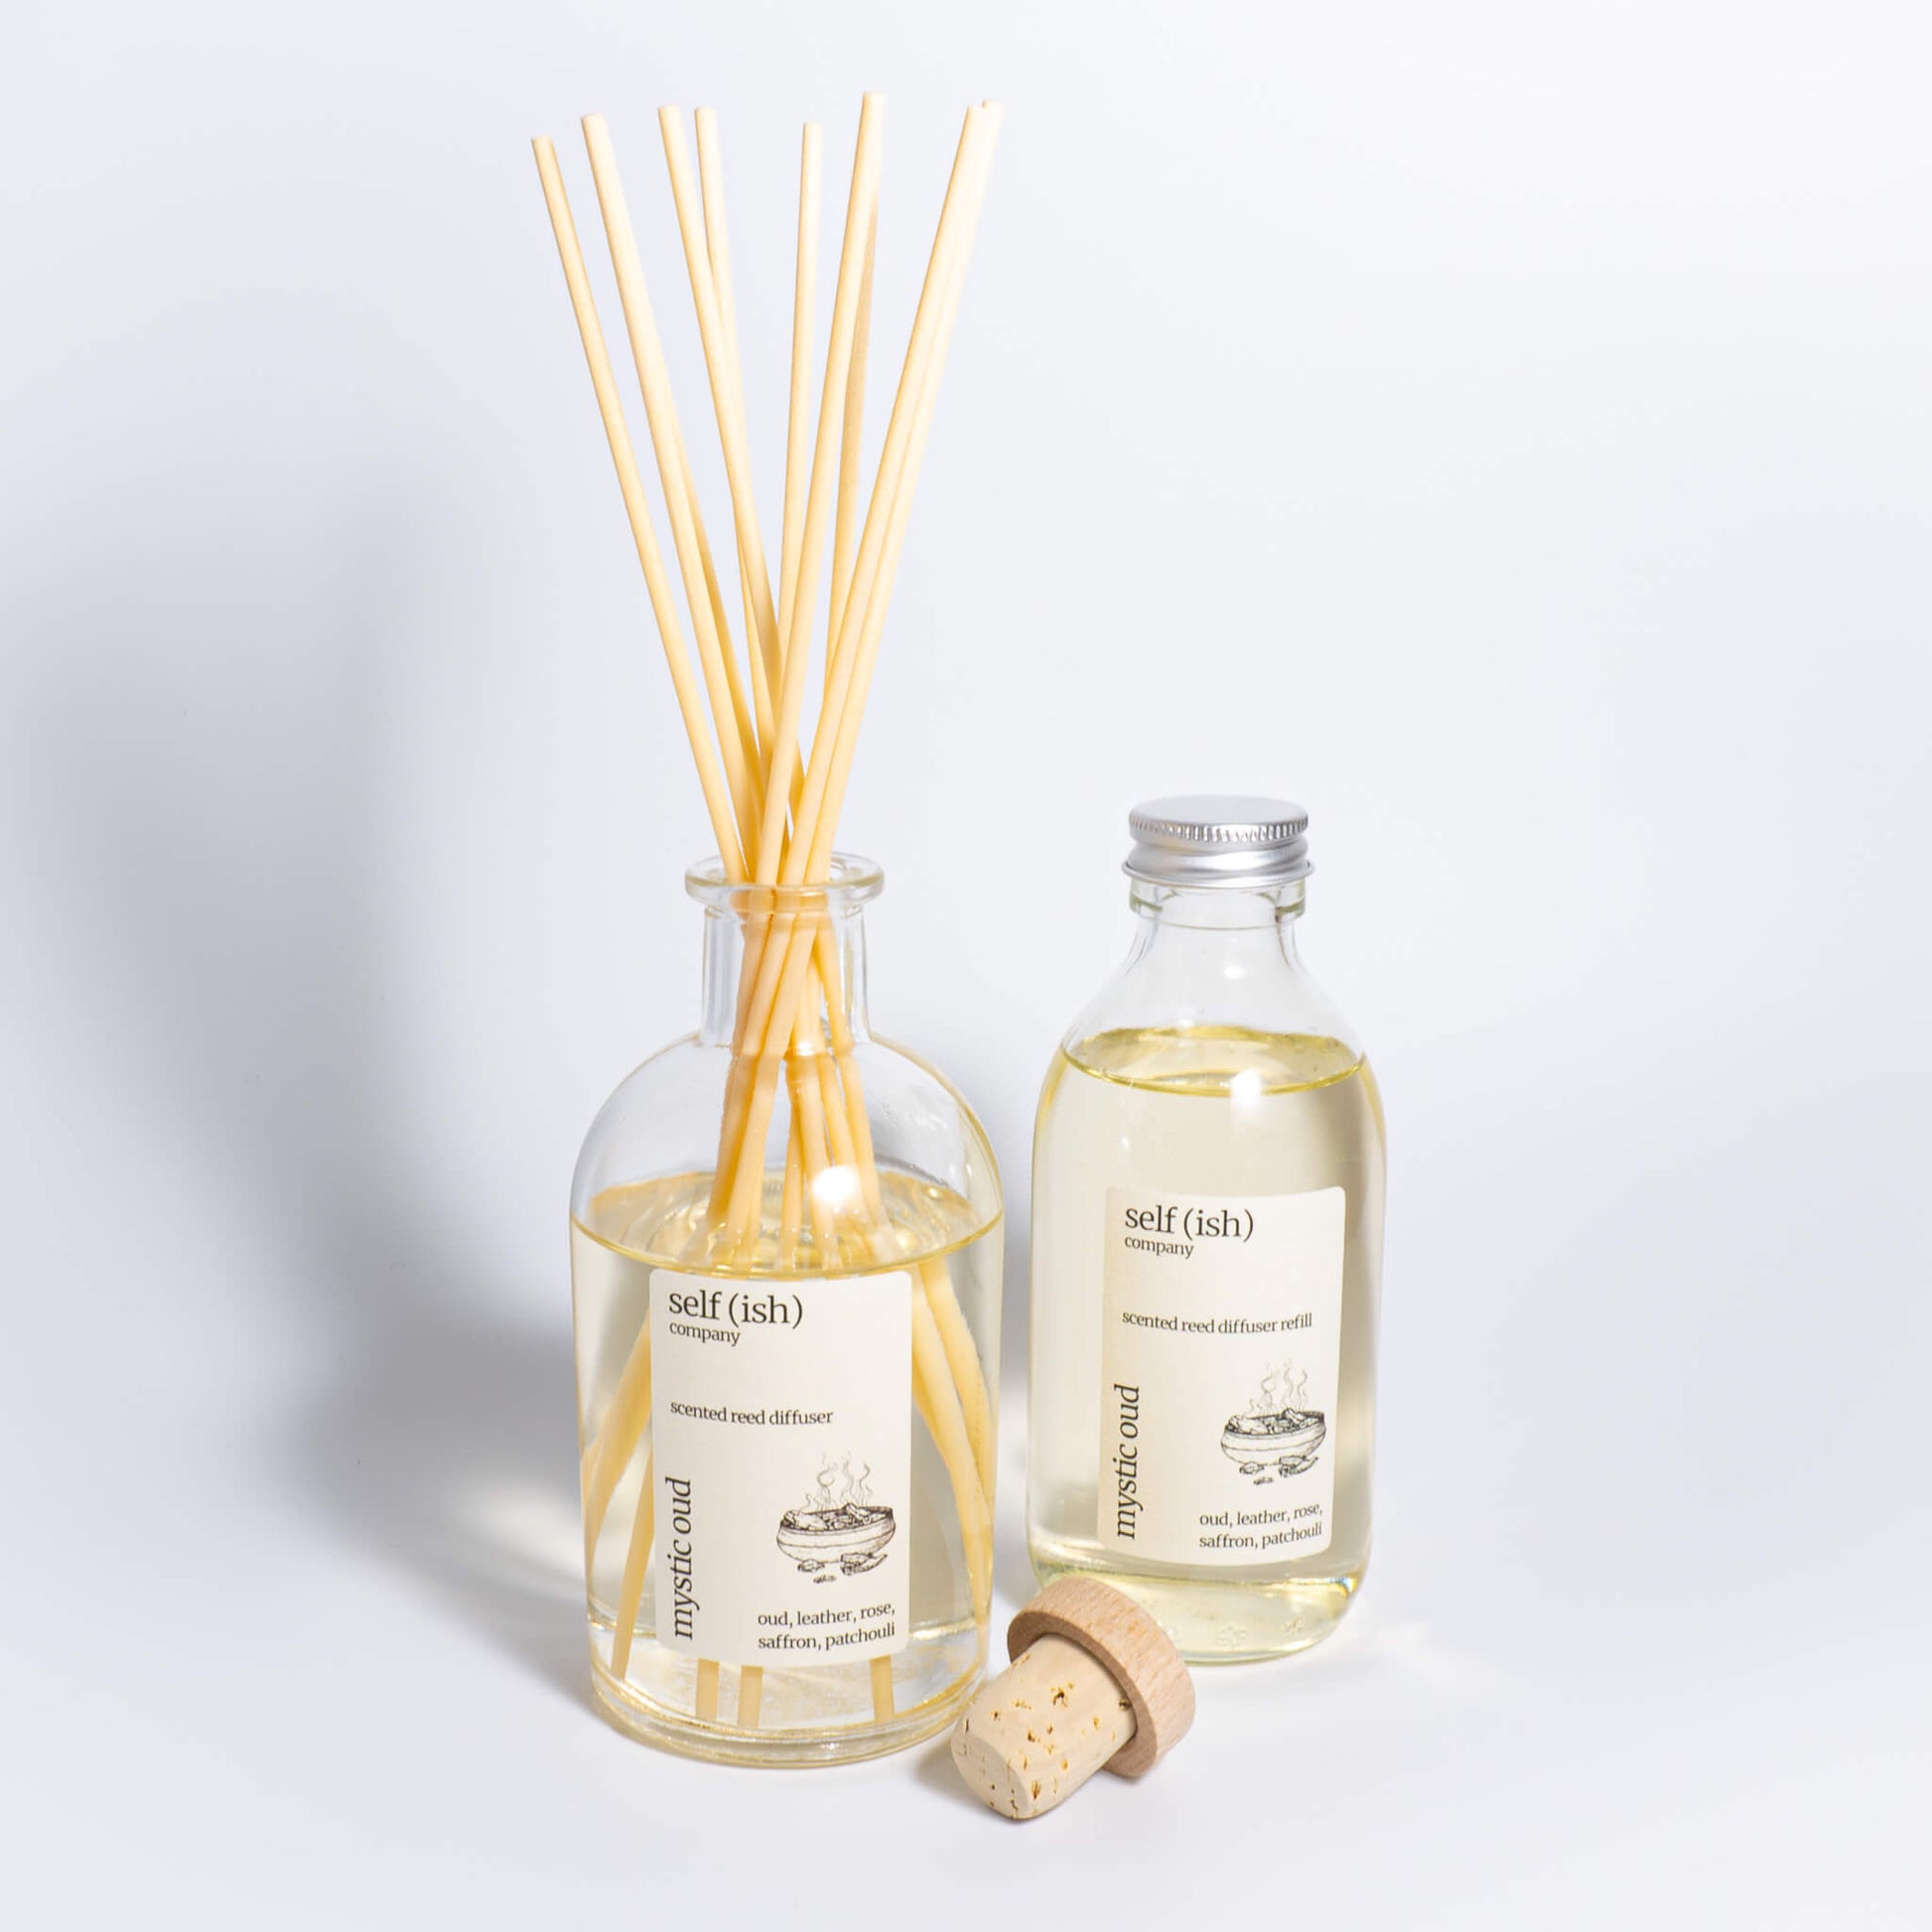 200ml oud scented reed diffuser refill in clear glass bottle with aluminium lid